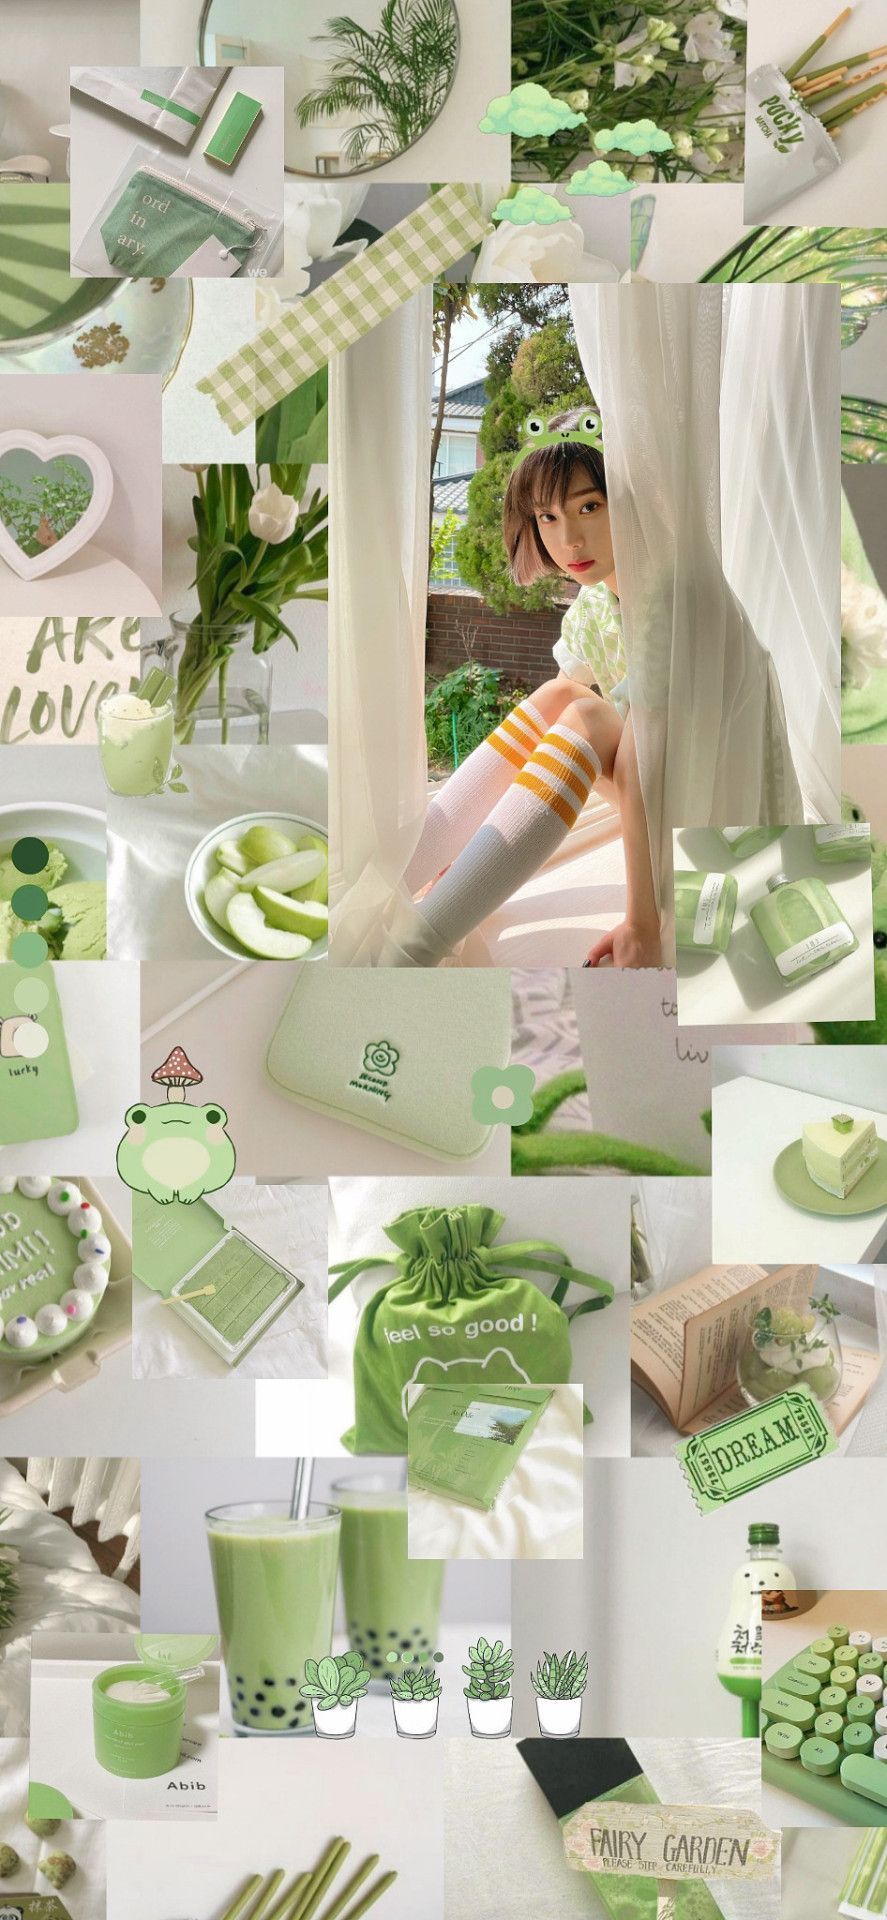 Aesthetic pictures of green plants, food, and accessories. - Aespa